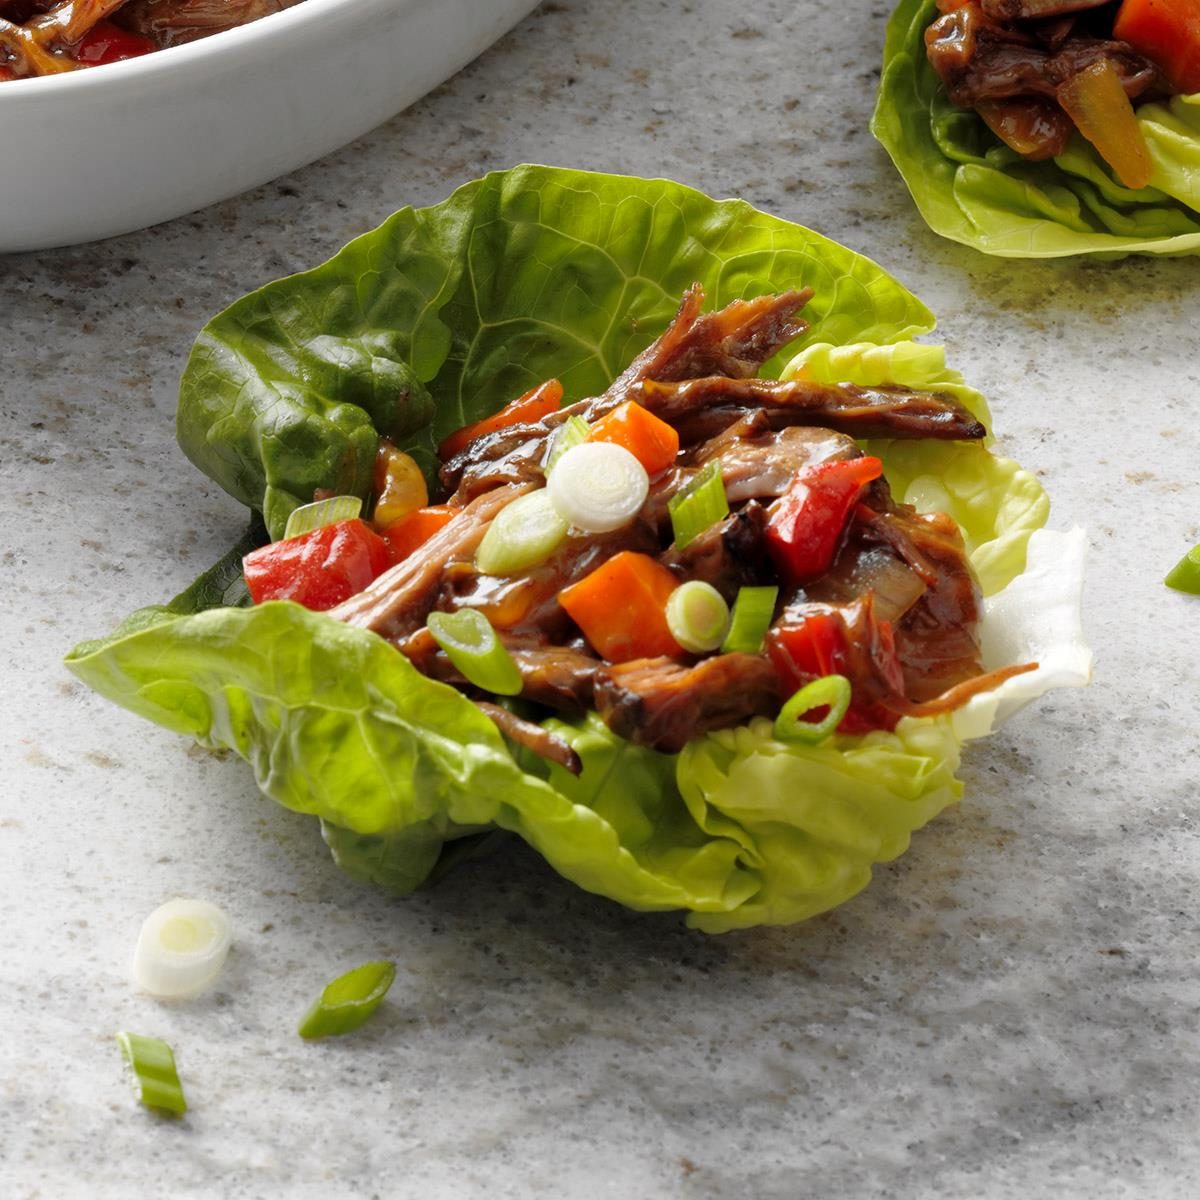 Day 2: Slow-Cooker Shredded Beef Lettuce Cups